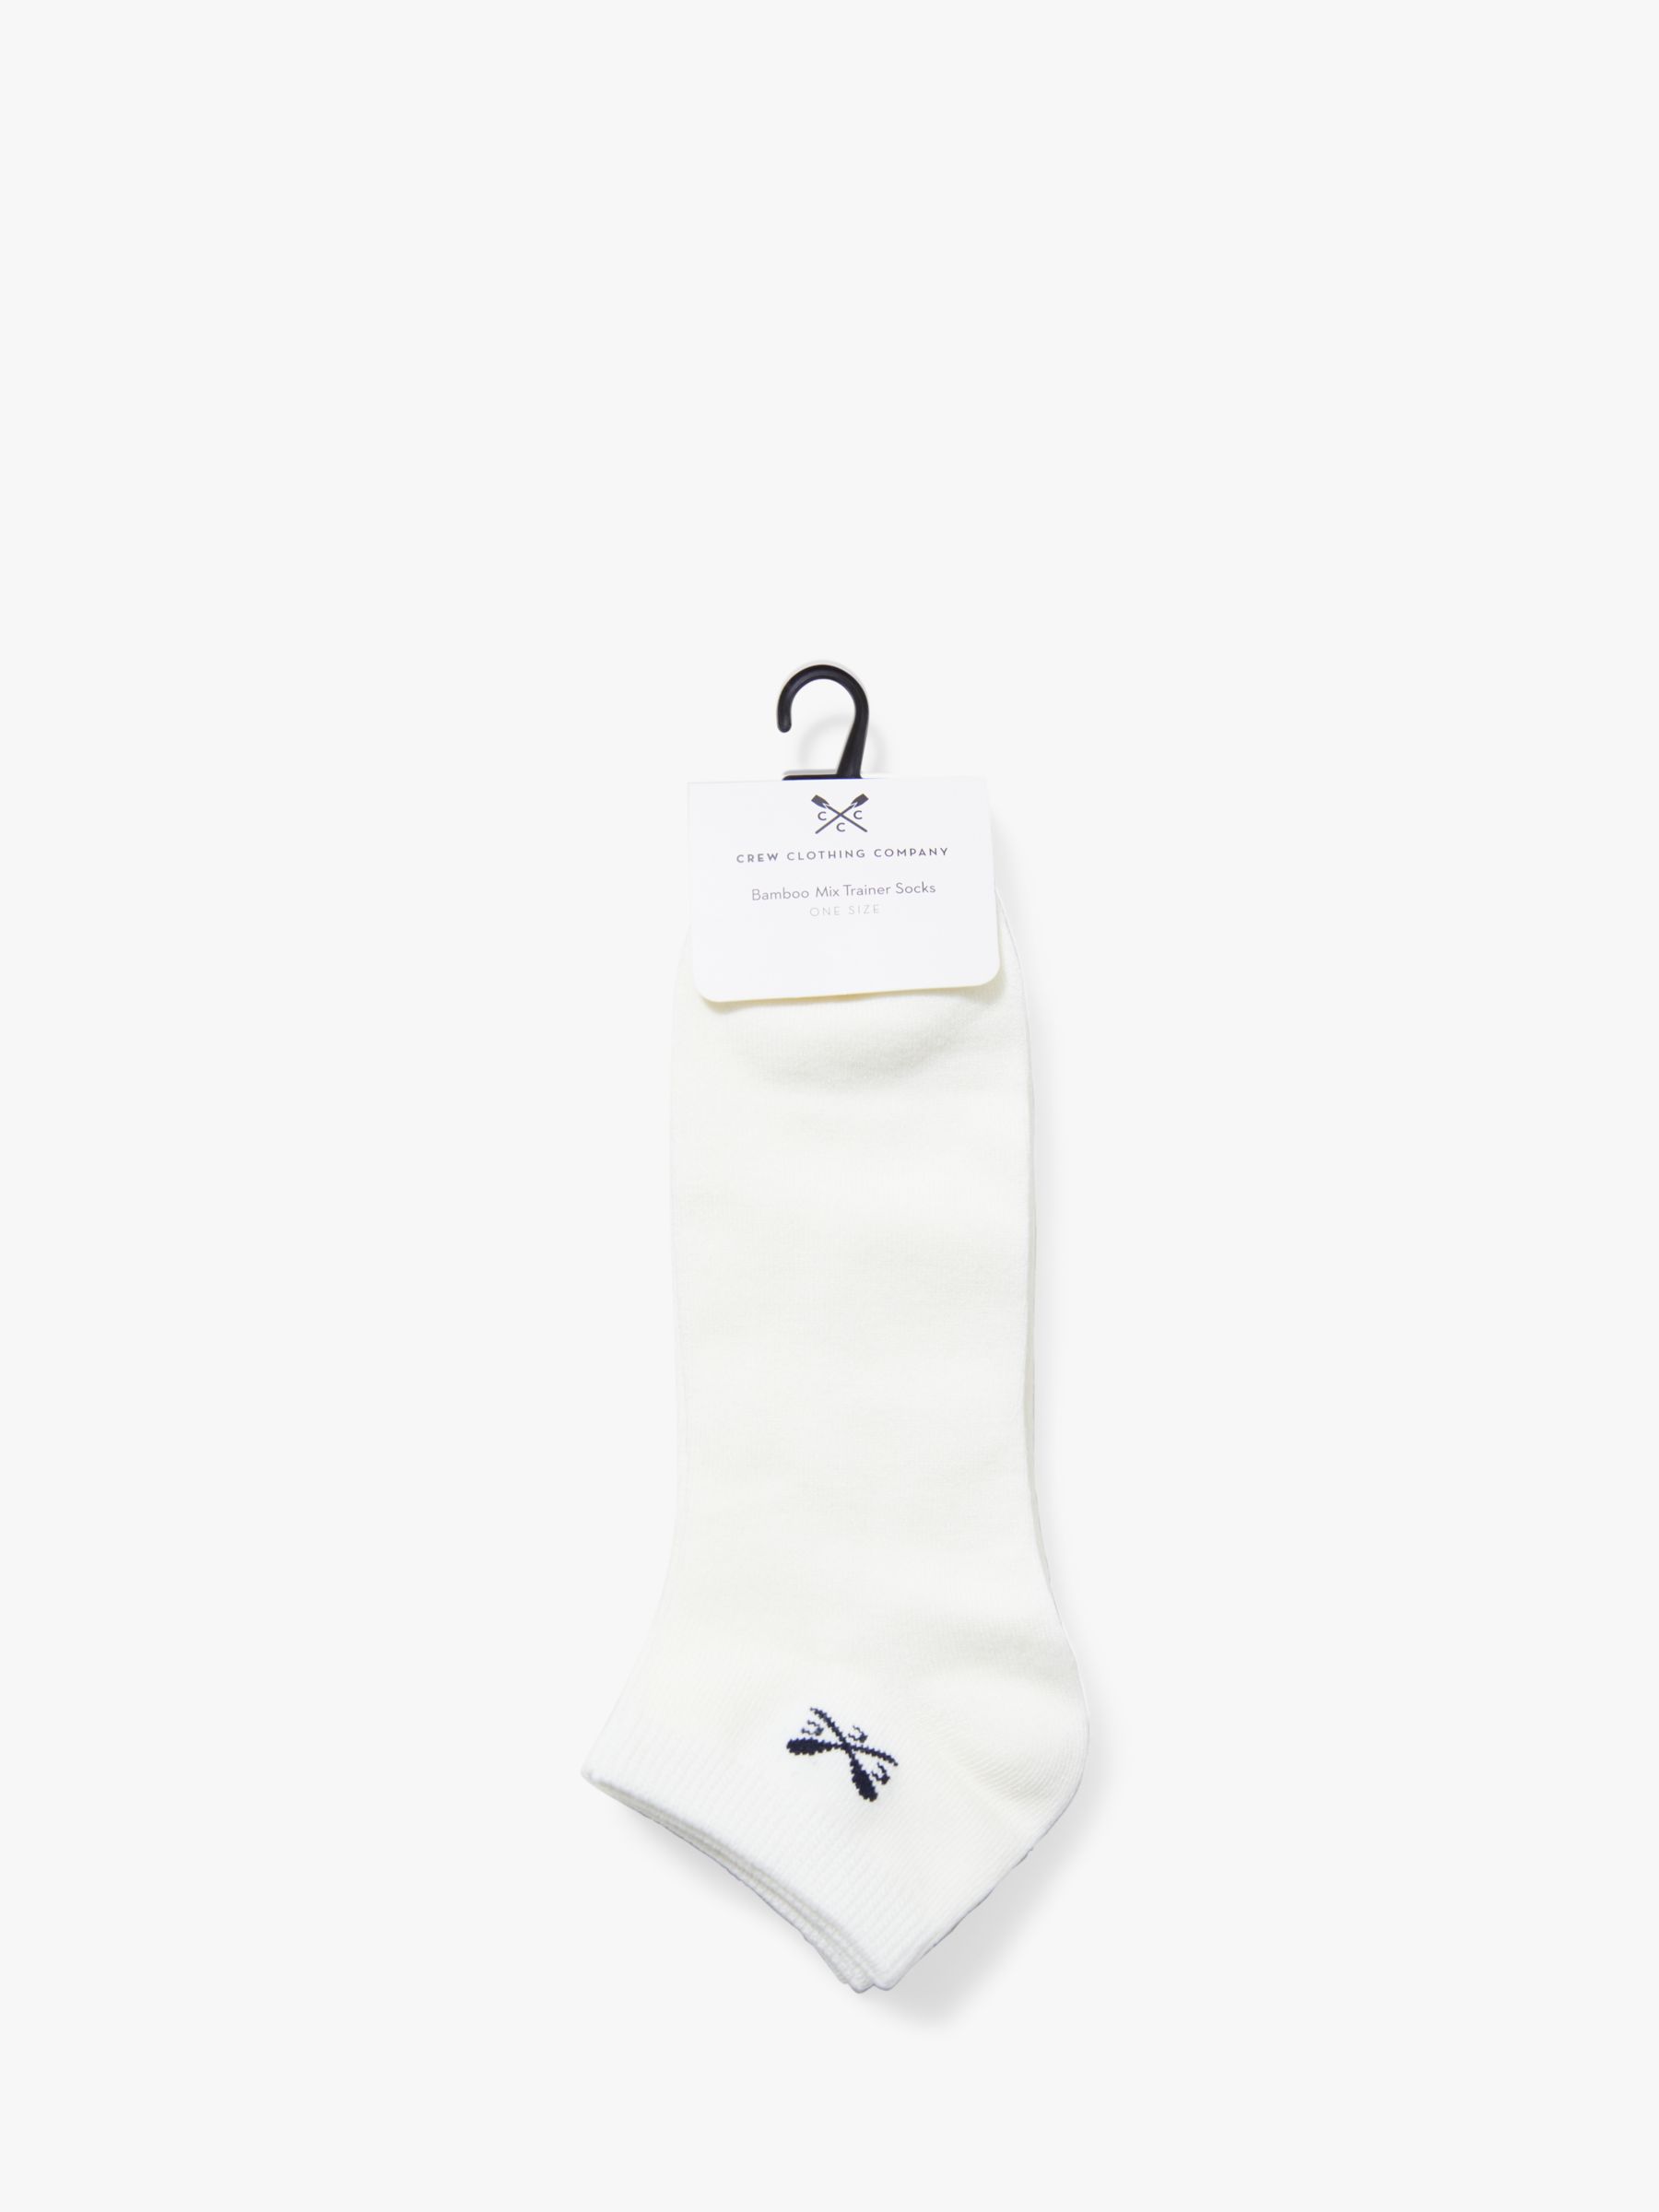 Buy Crew Clothing Bamboo Trainer Socks, Pack of 3, White Online at johnlewis.com